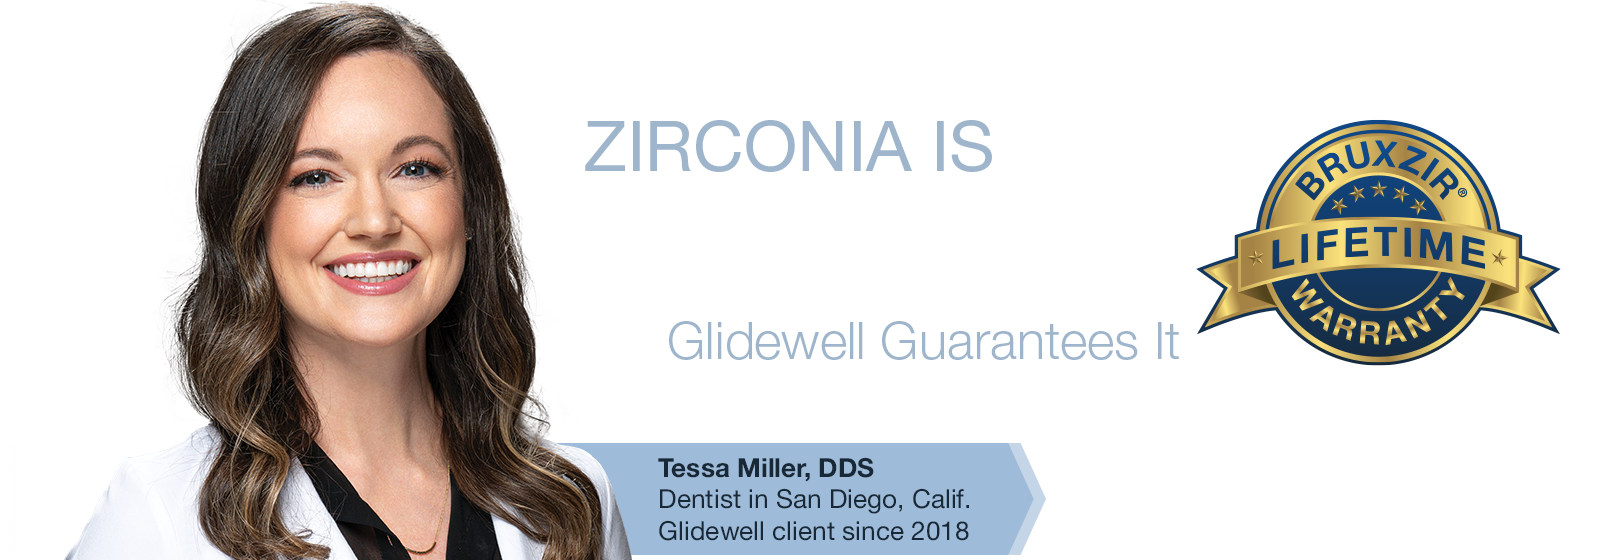 Zirconia is forever, Glidewell guarantees it